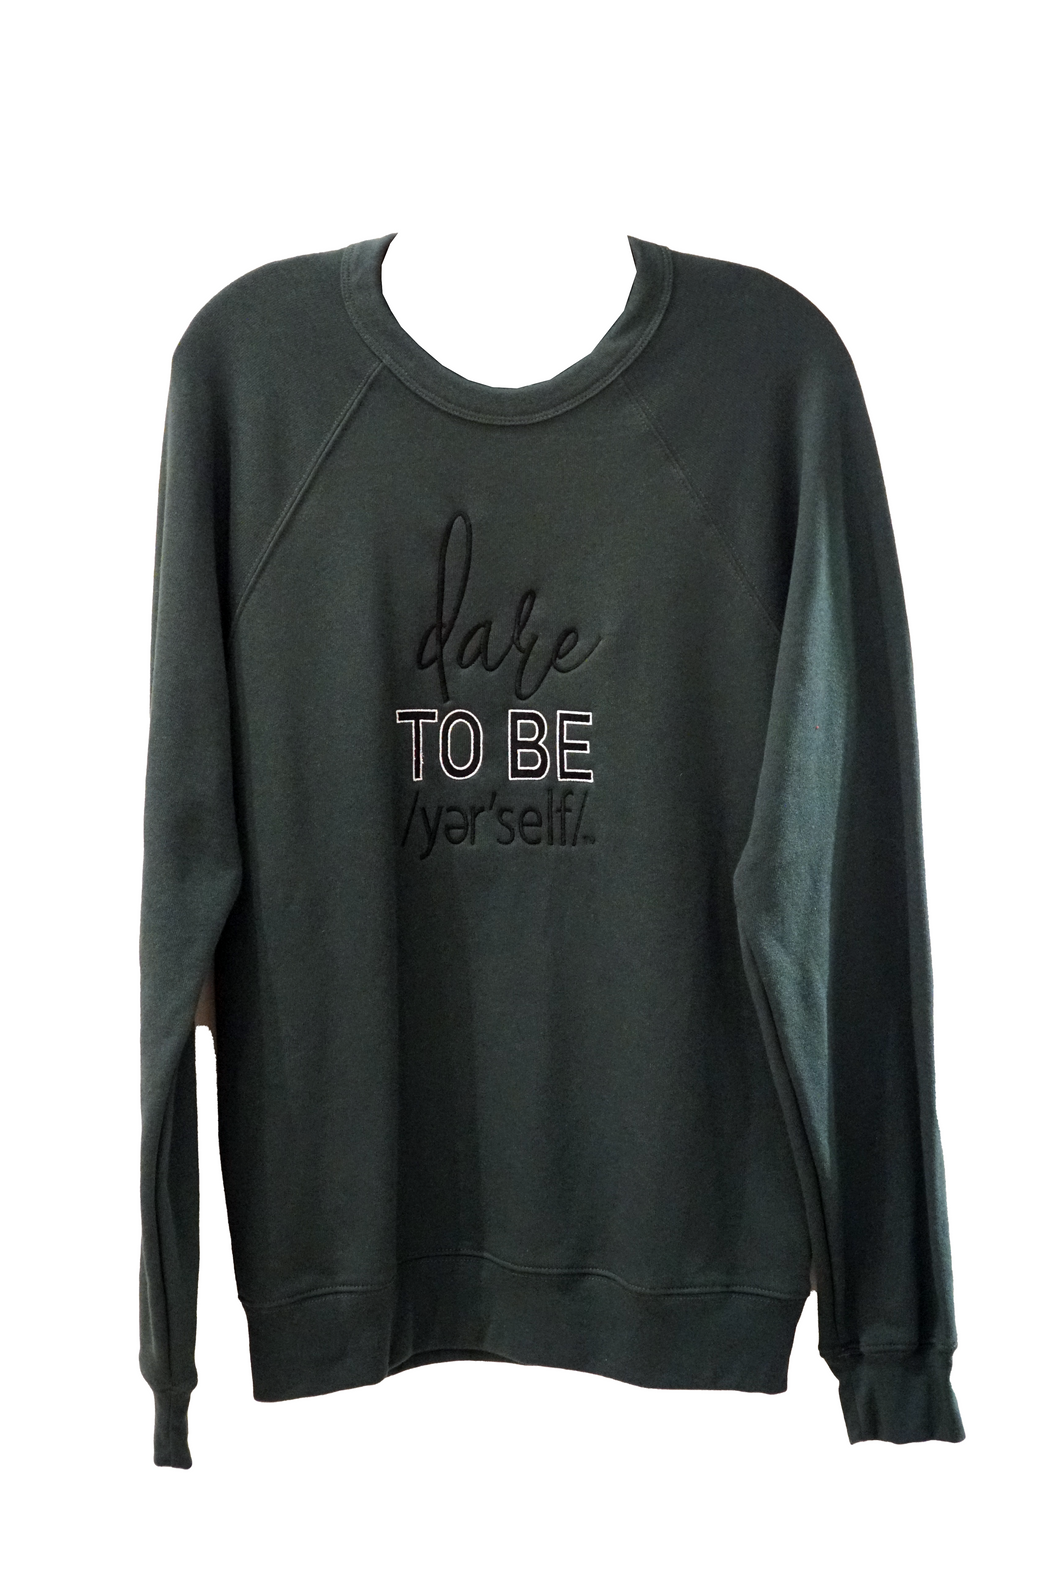 DARK GRAY CREWNECK WITH EMBROIDERED DTB YER'SELF